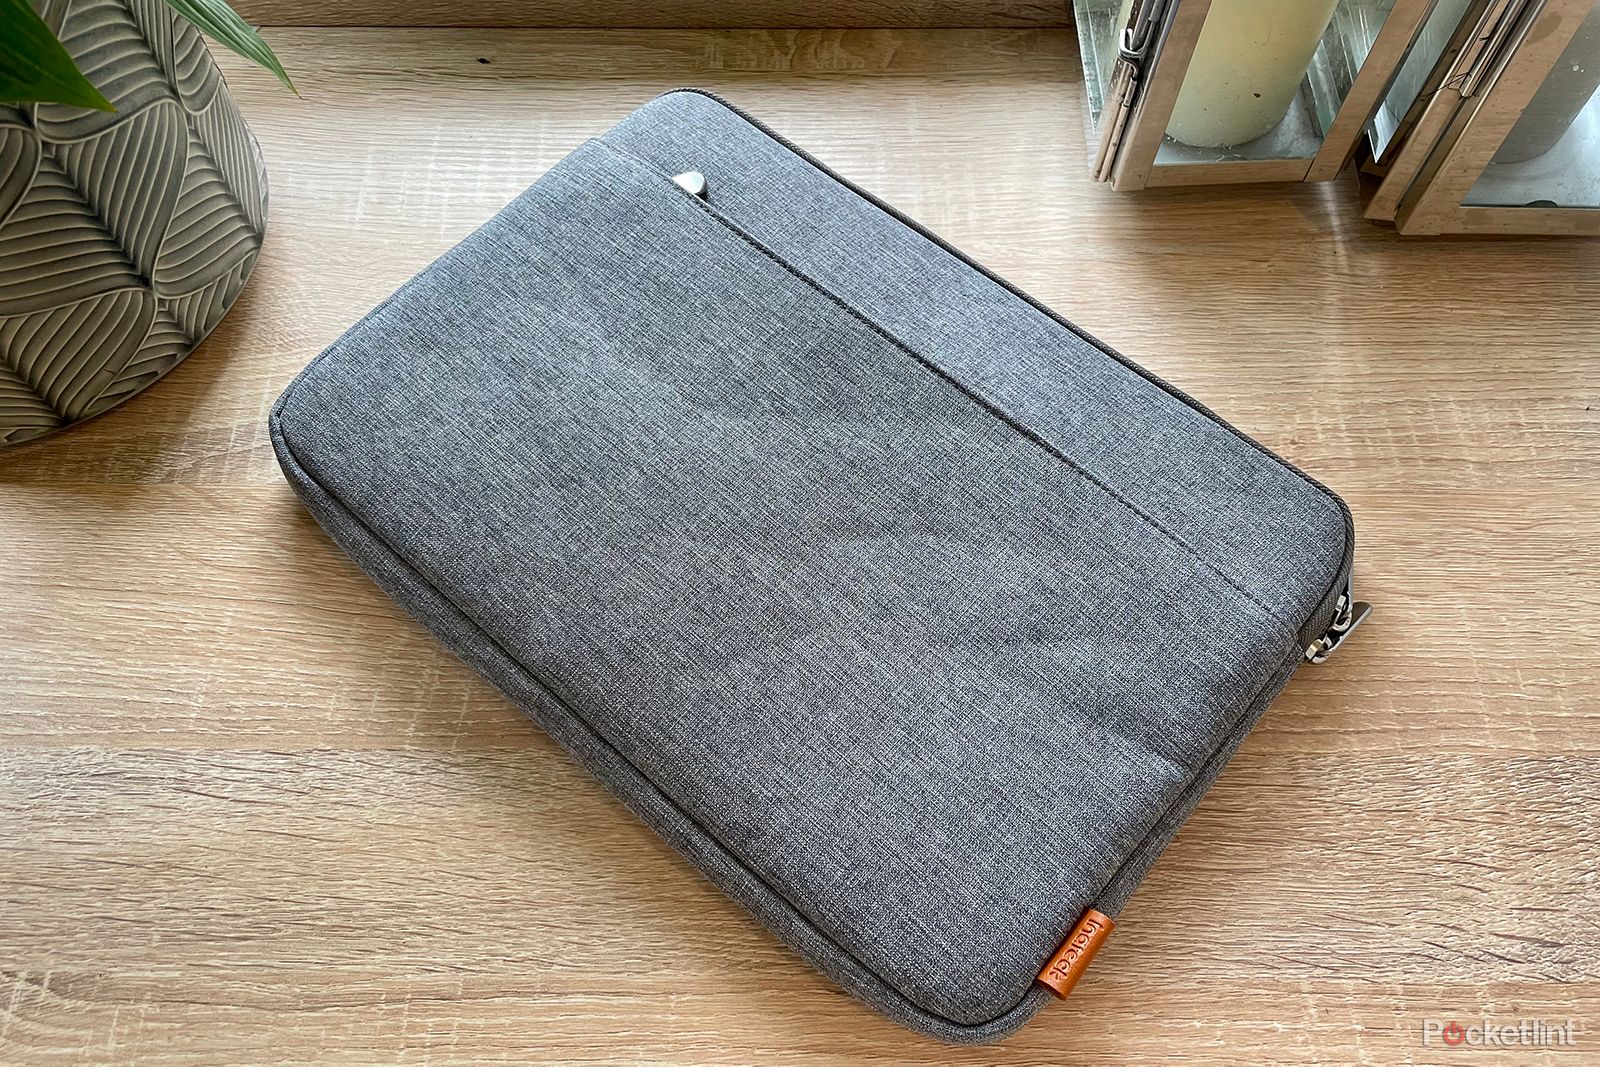 The Best 13-inch Laptop Sleeves 2020: REVIEWED Procase, Nacuwa